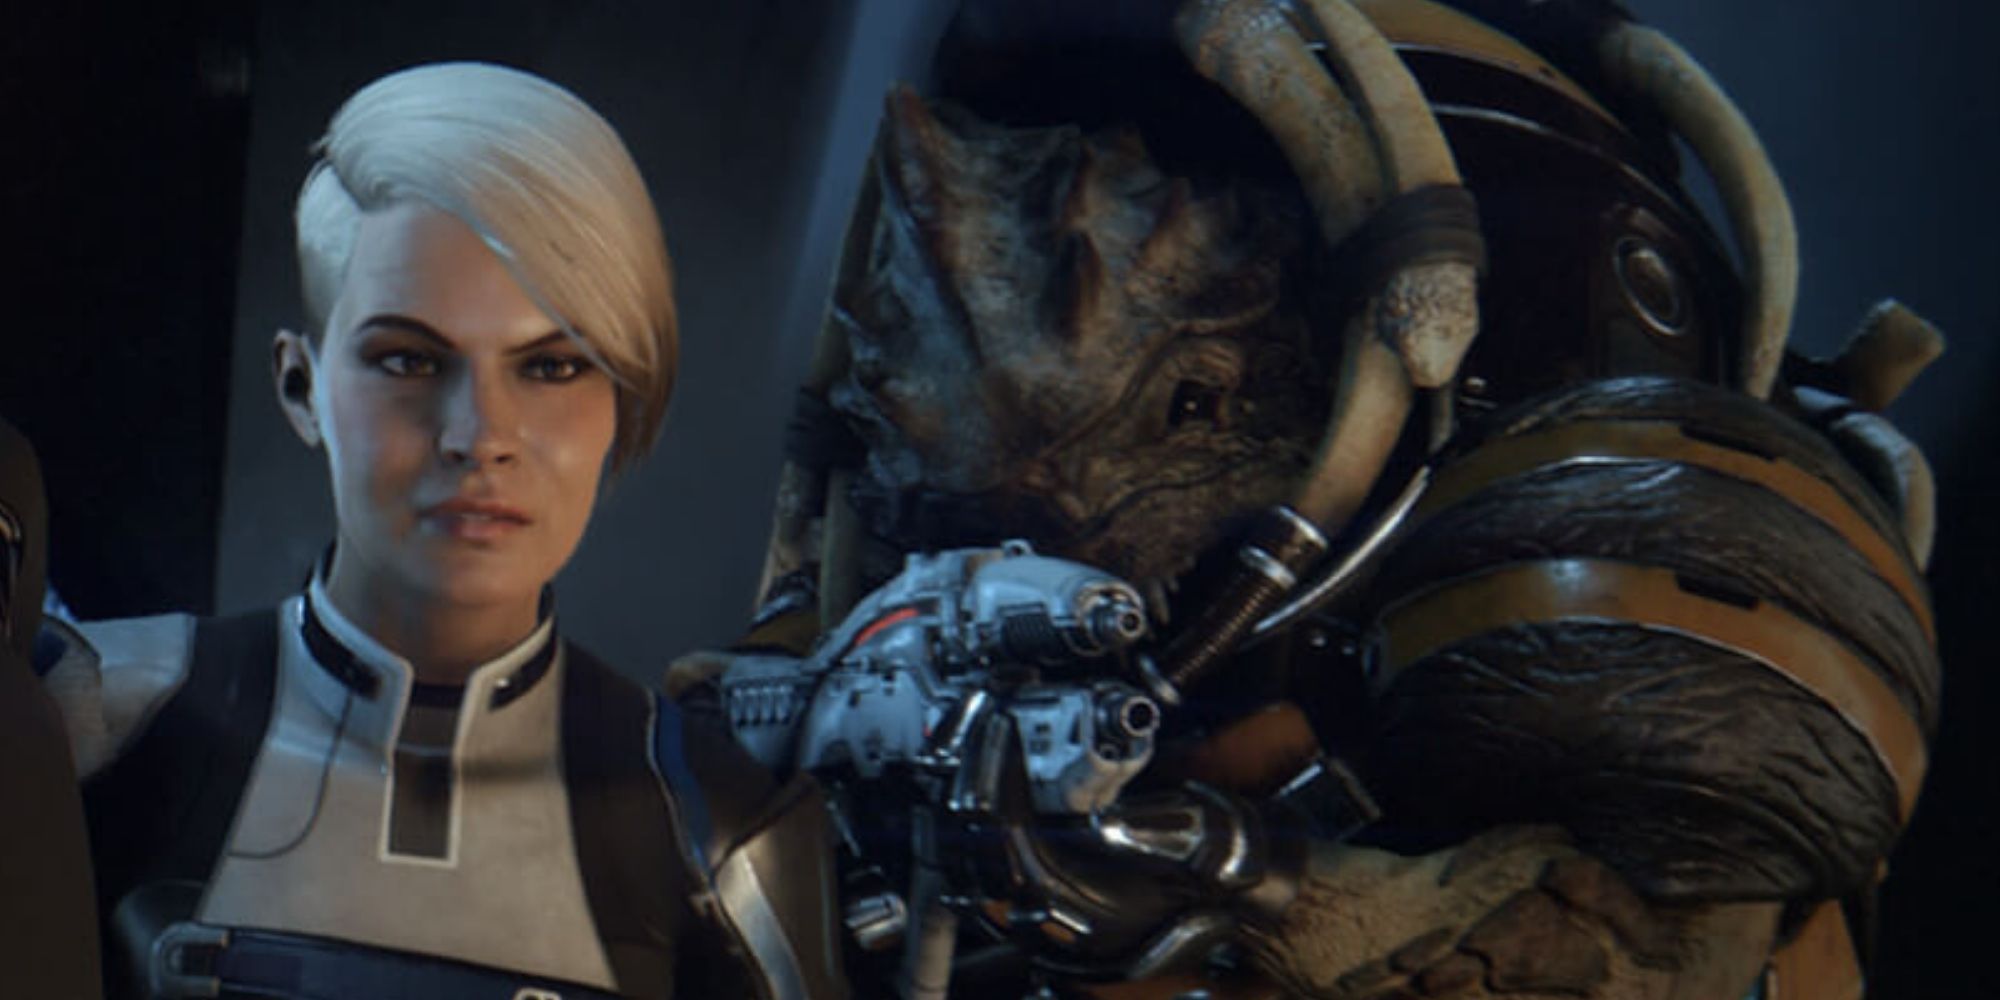 Mass Effect Andromeda - Cora standing next to Drack with his gun out